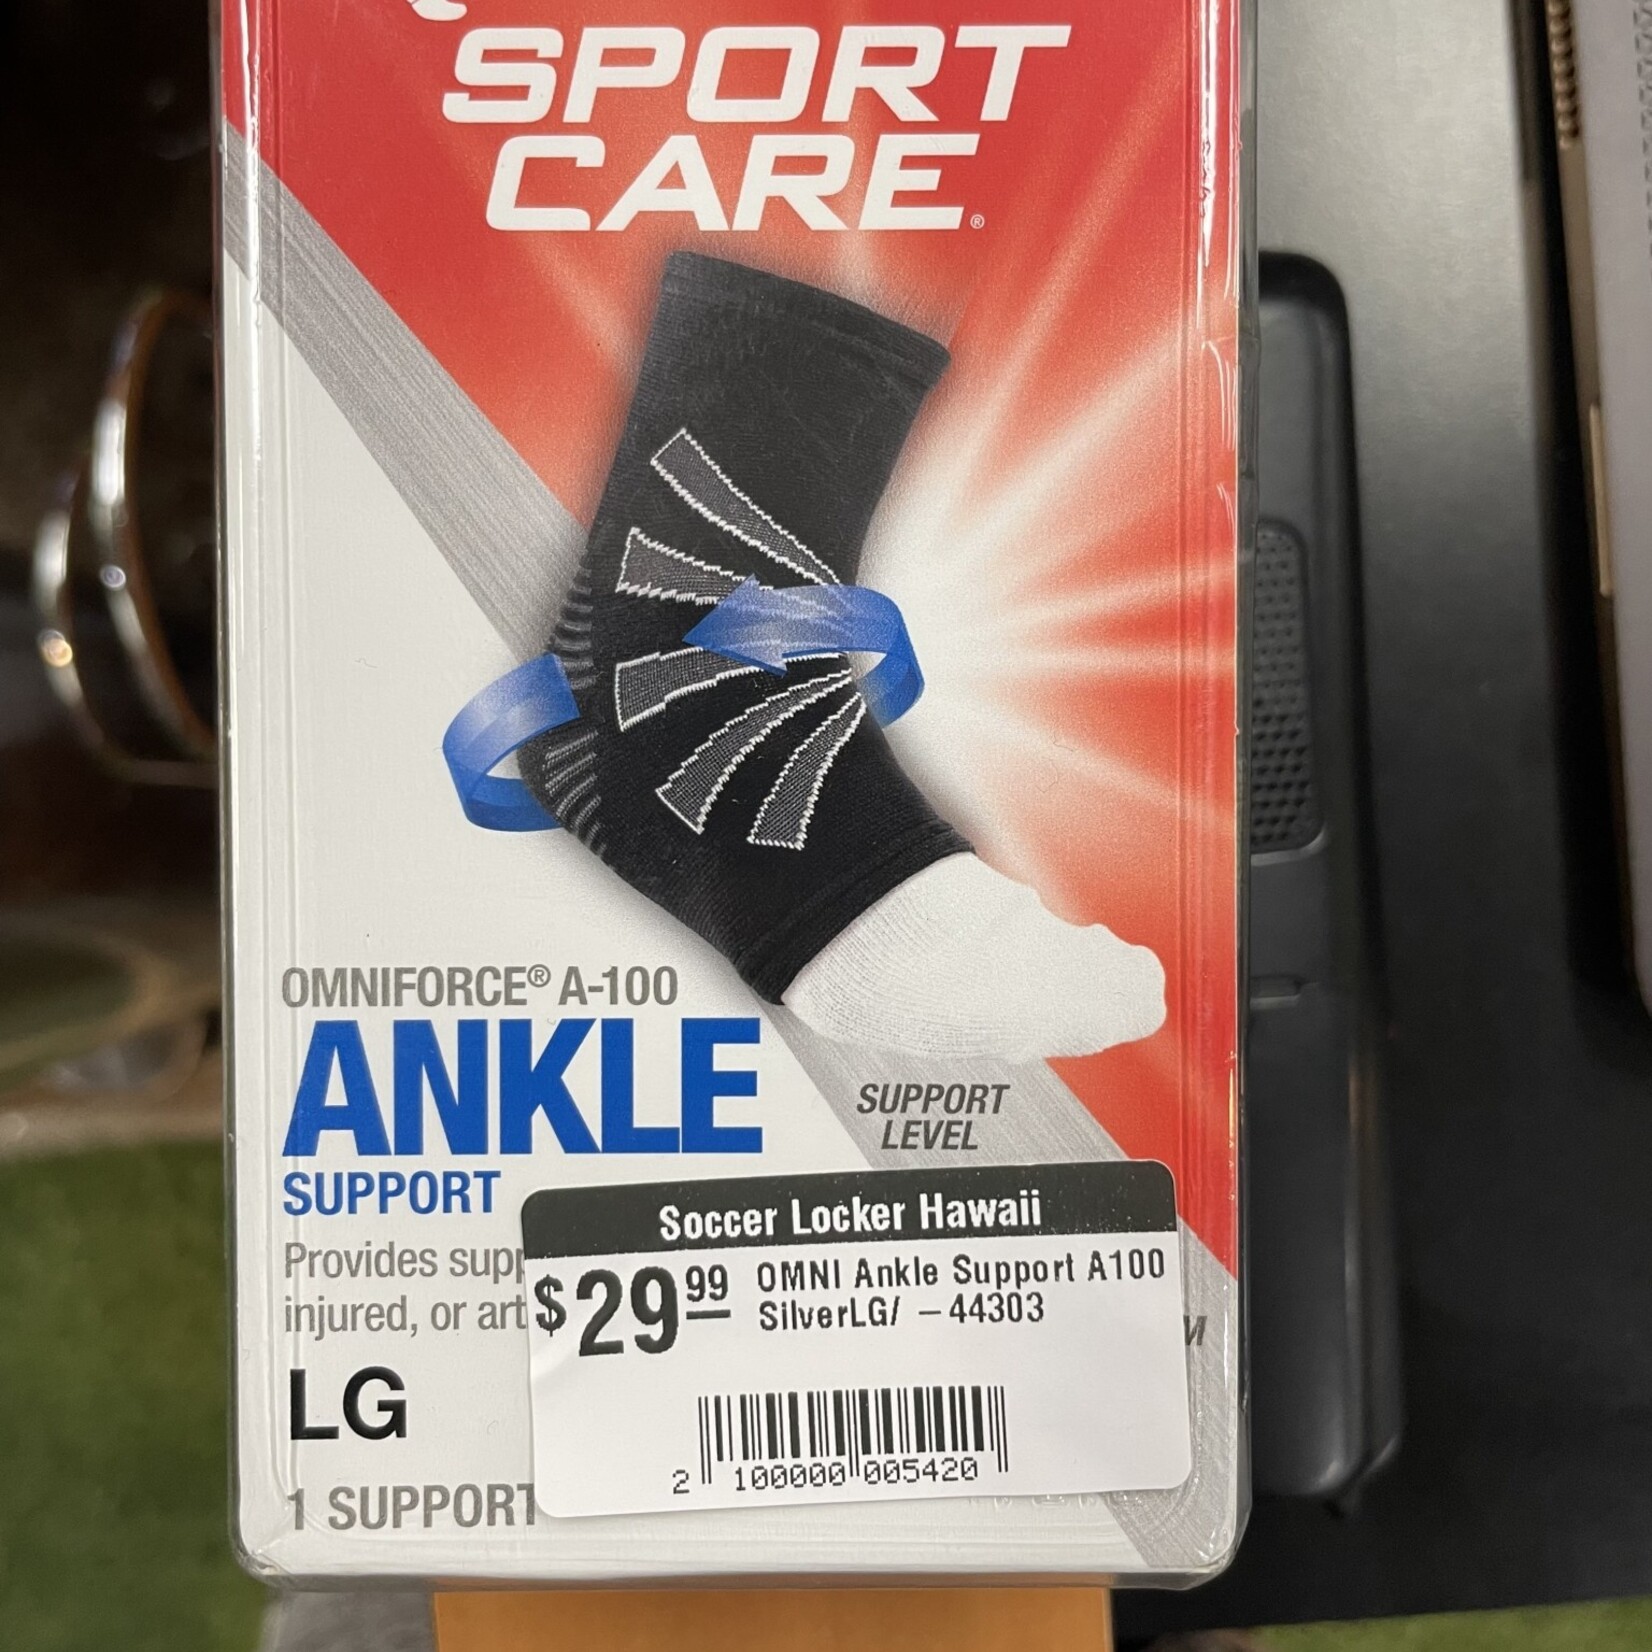 OMNI Ankle Support A100 SilverLG/ -44303